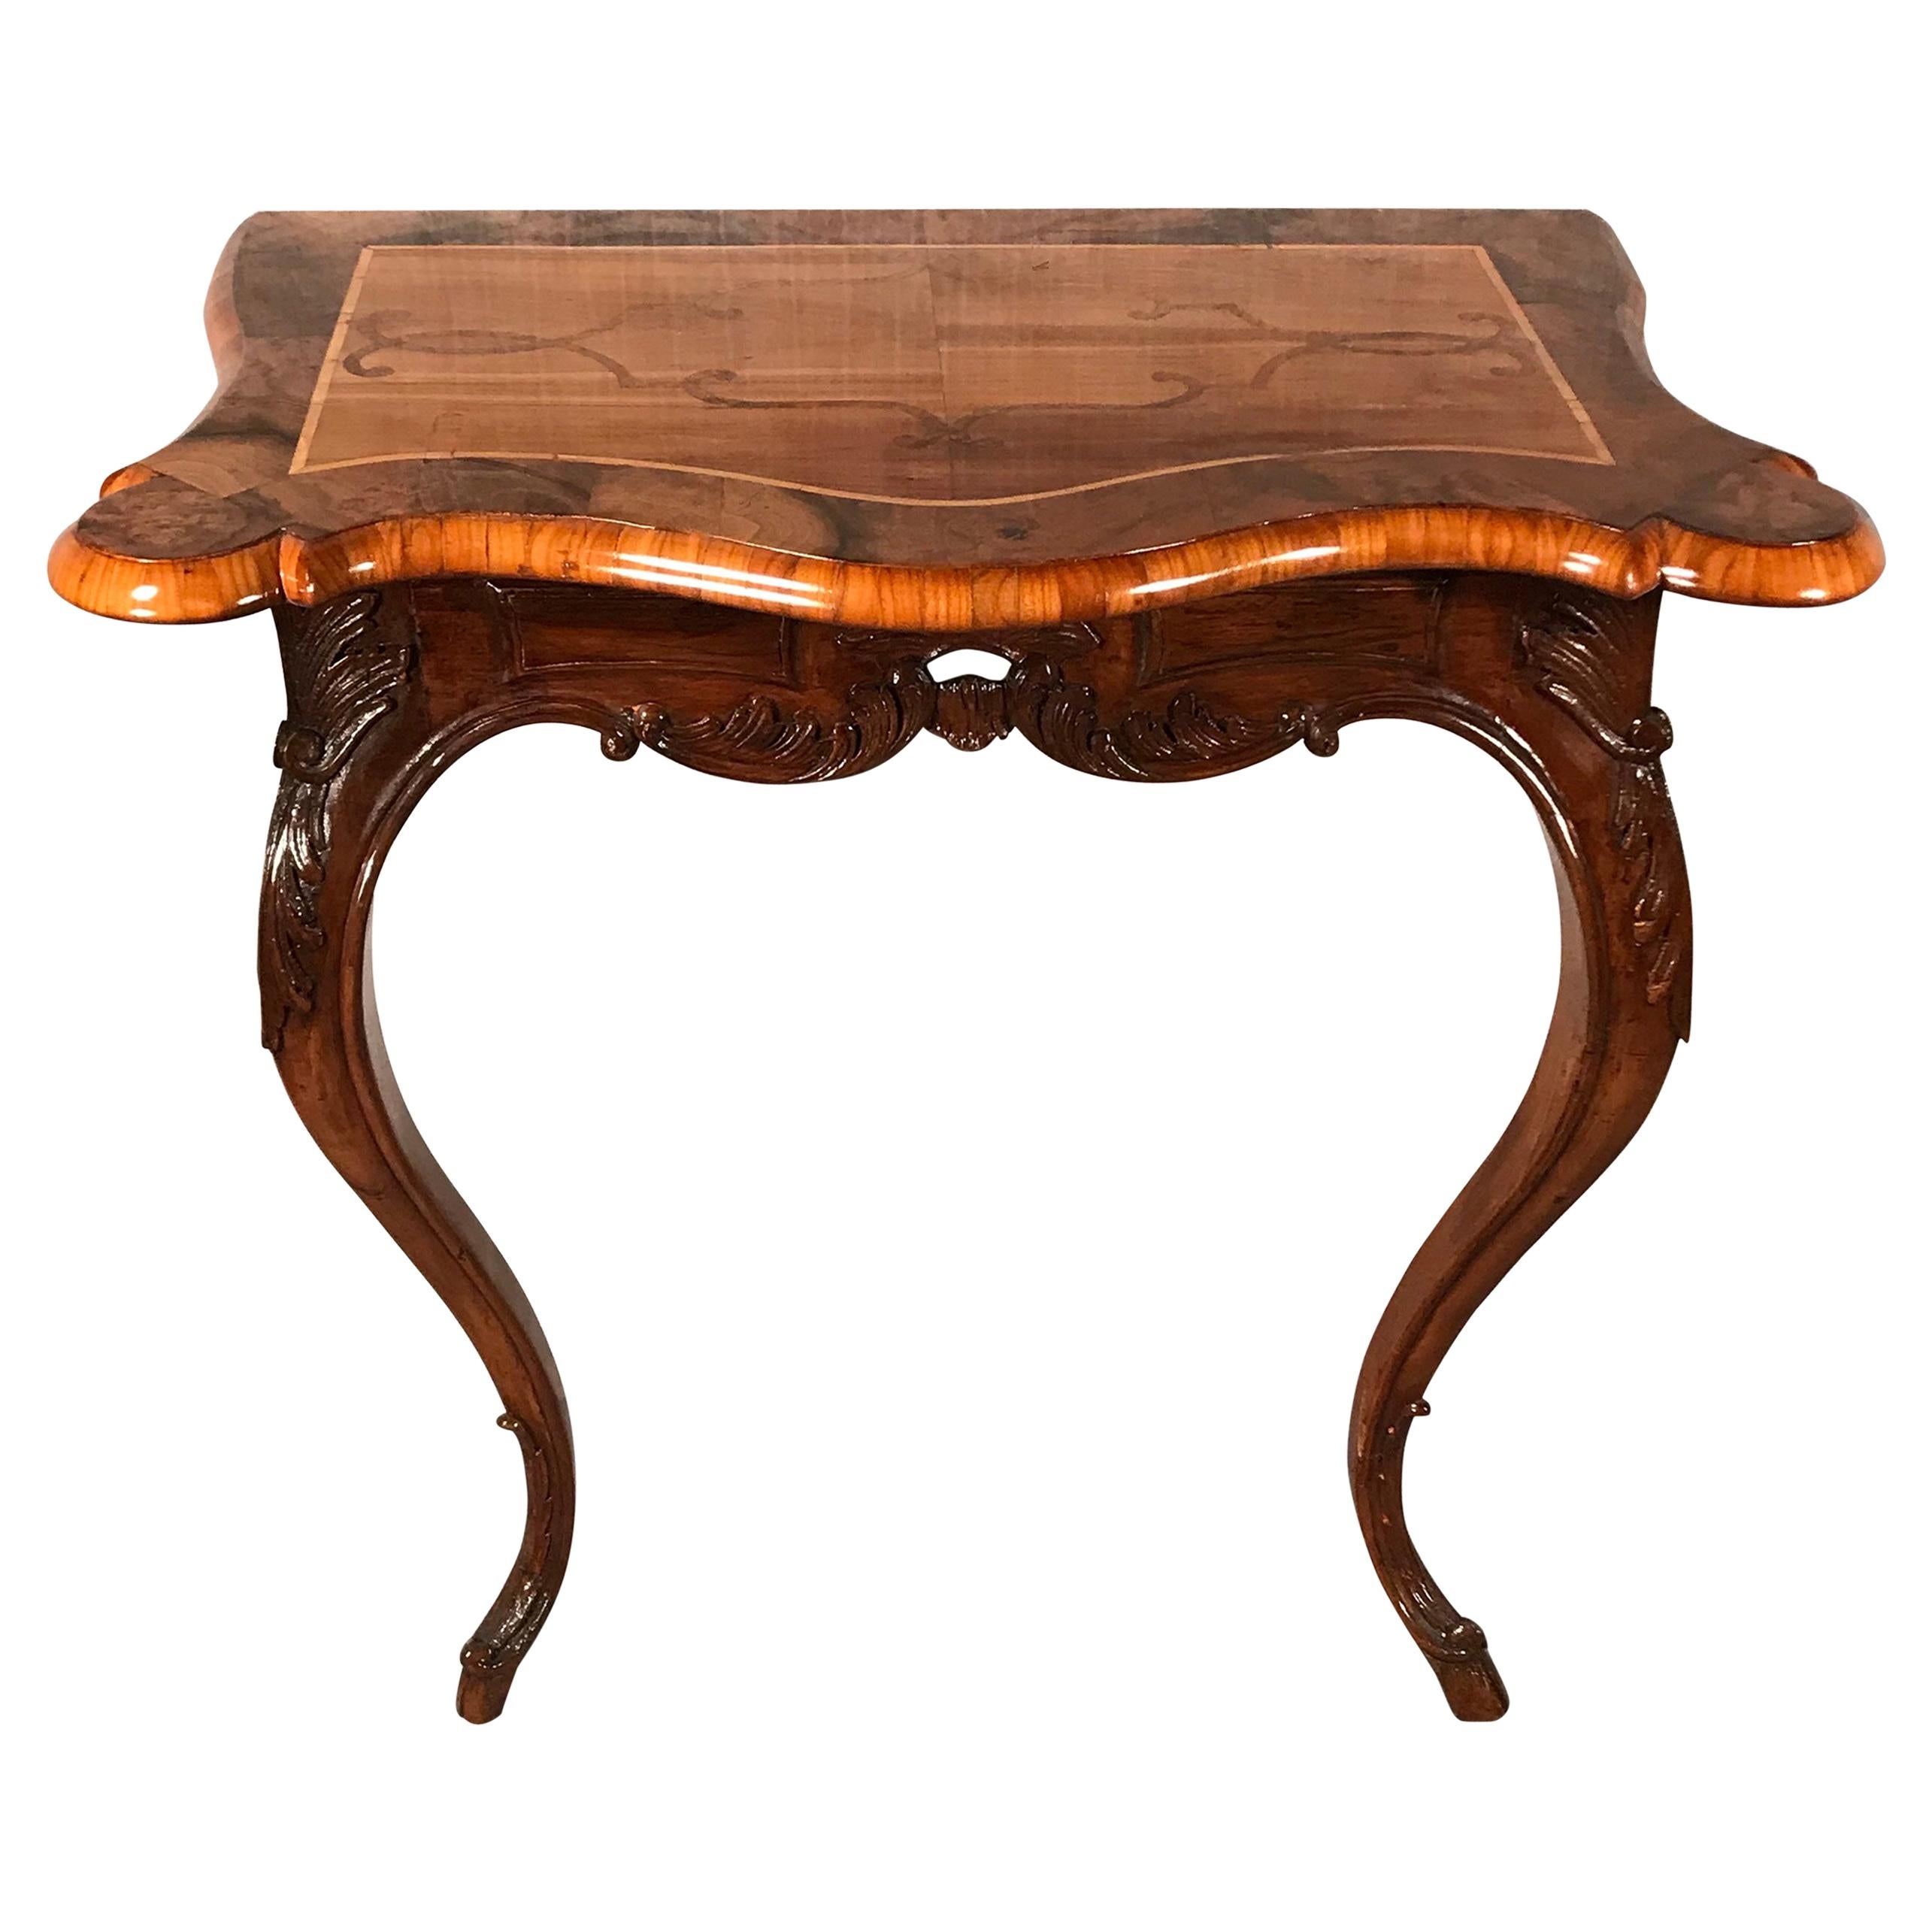 Baroque Console Table, Germany 1750, Walnut